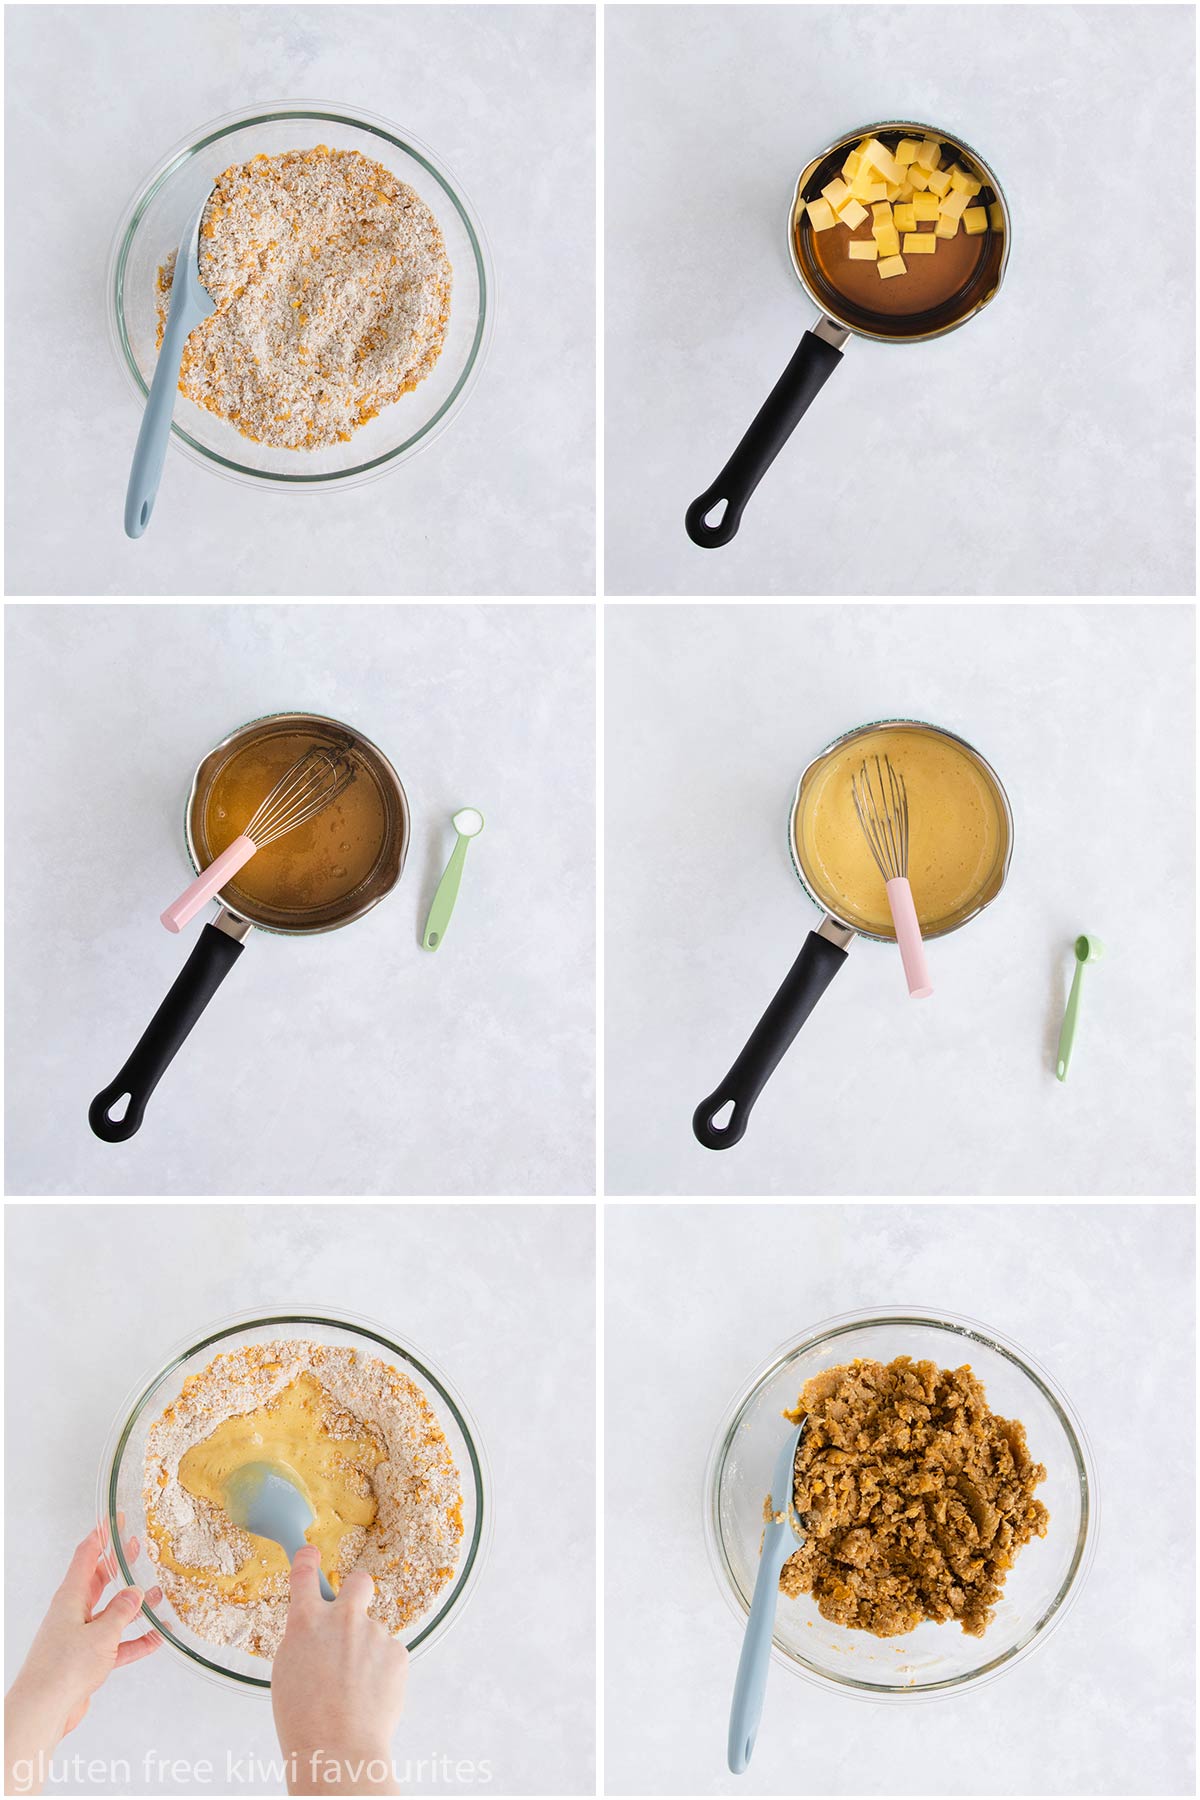 Collage of pictures showing the biscuit dough being mixed.